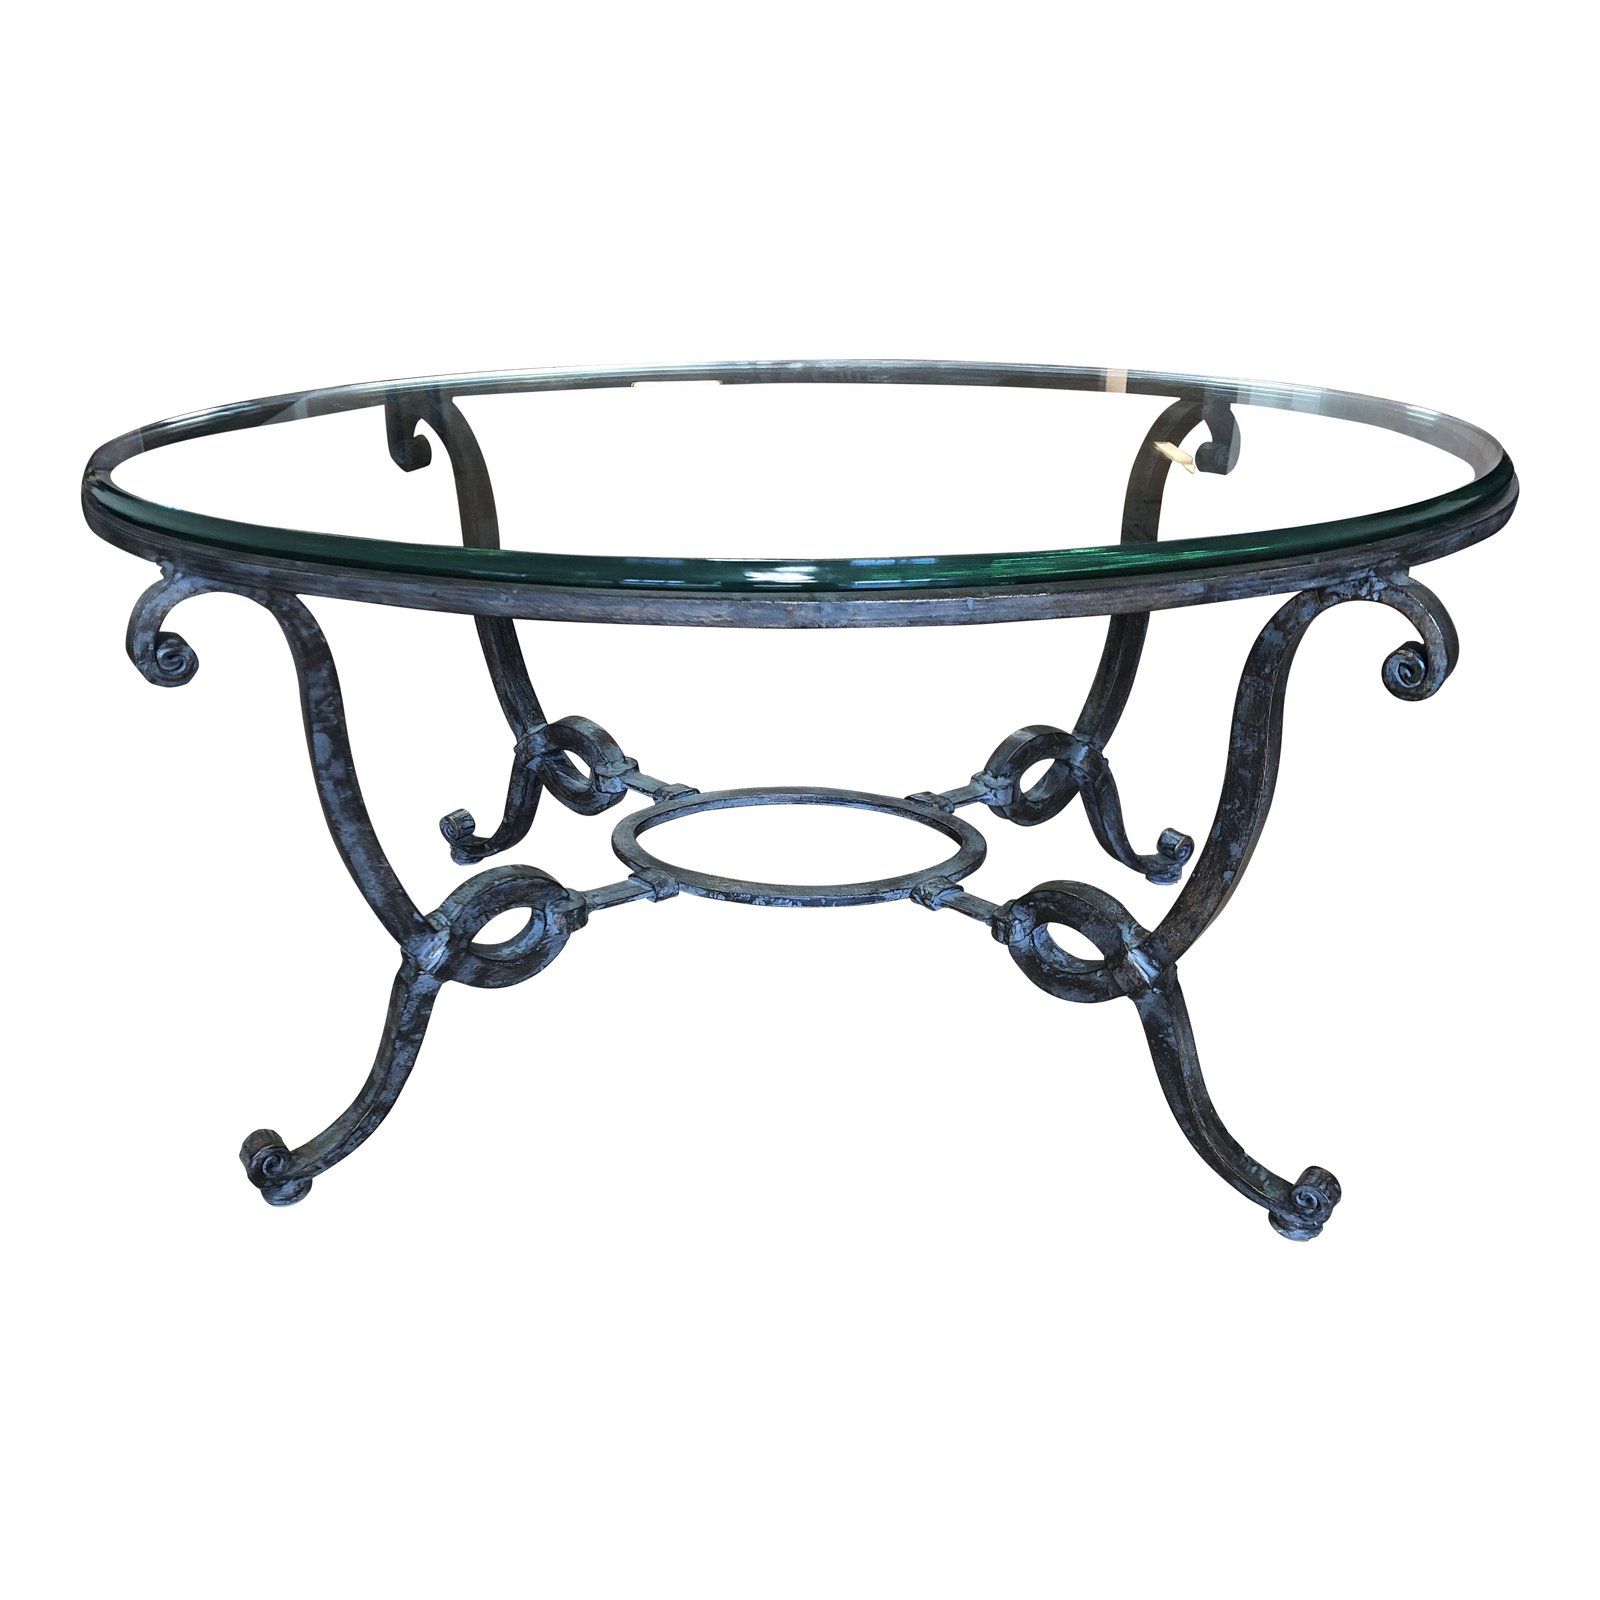 Design Plus For Oval Aged Black Iron Coffee Tables (View 20 of 20)